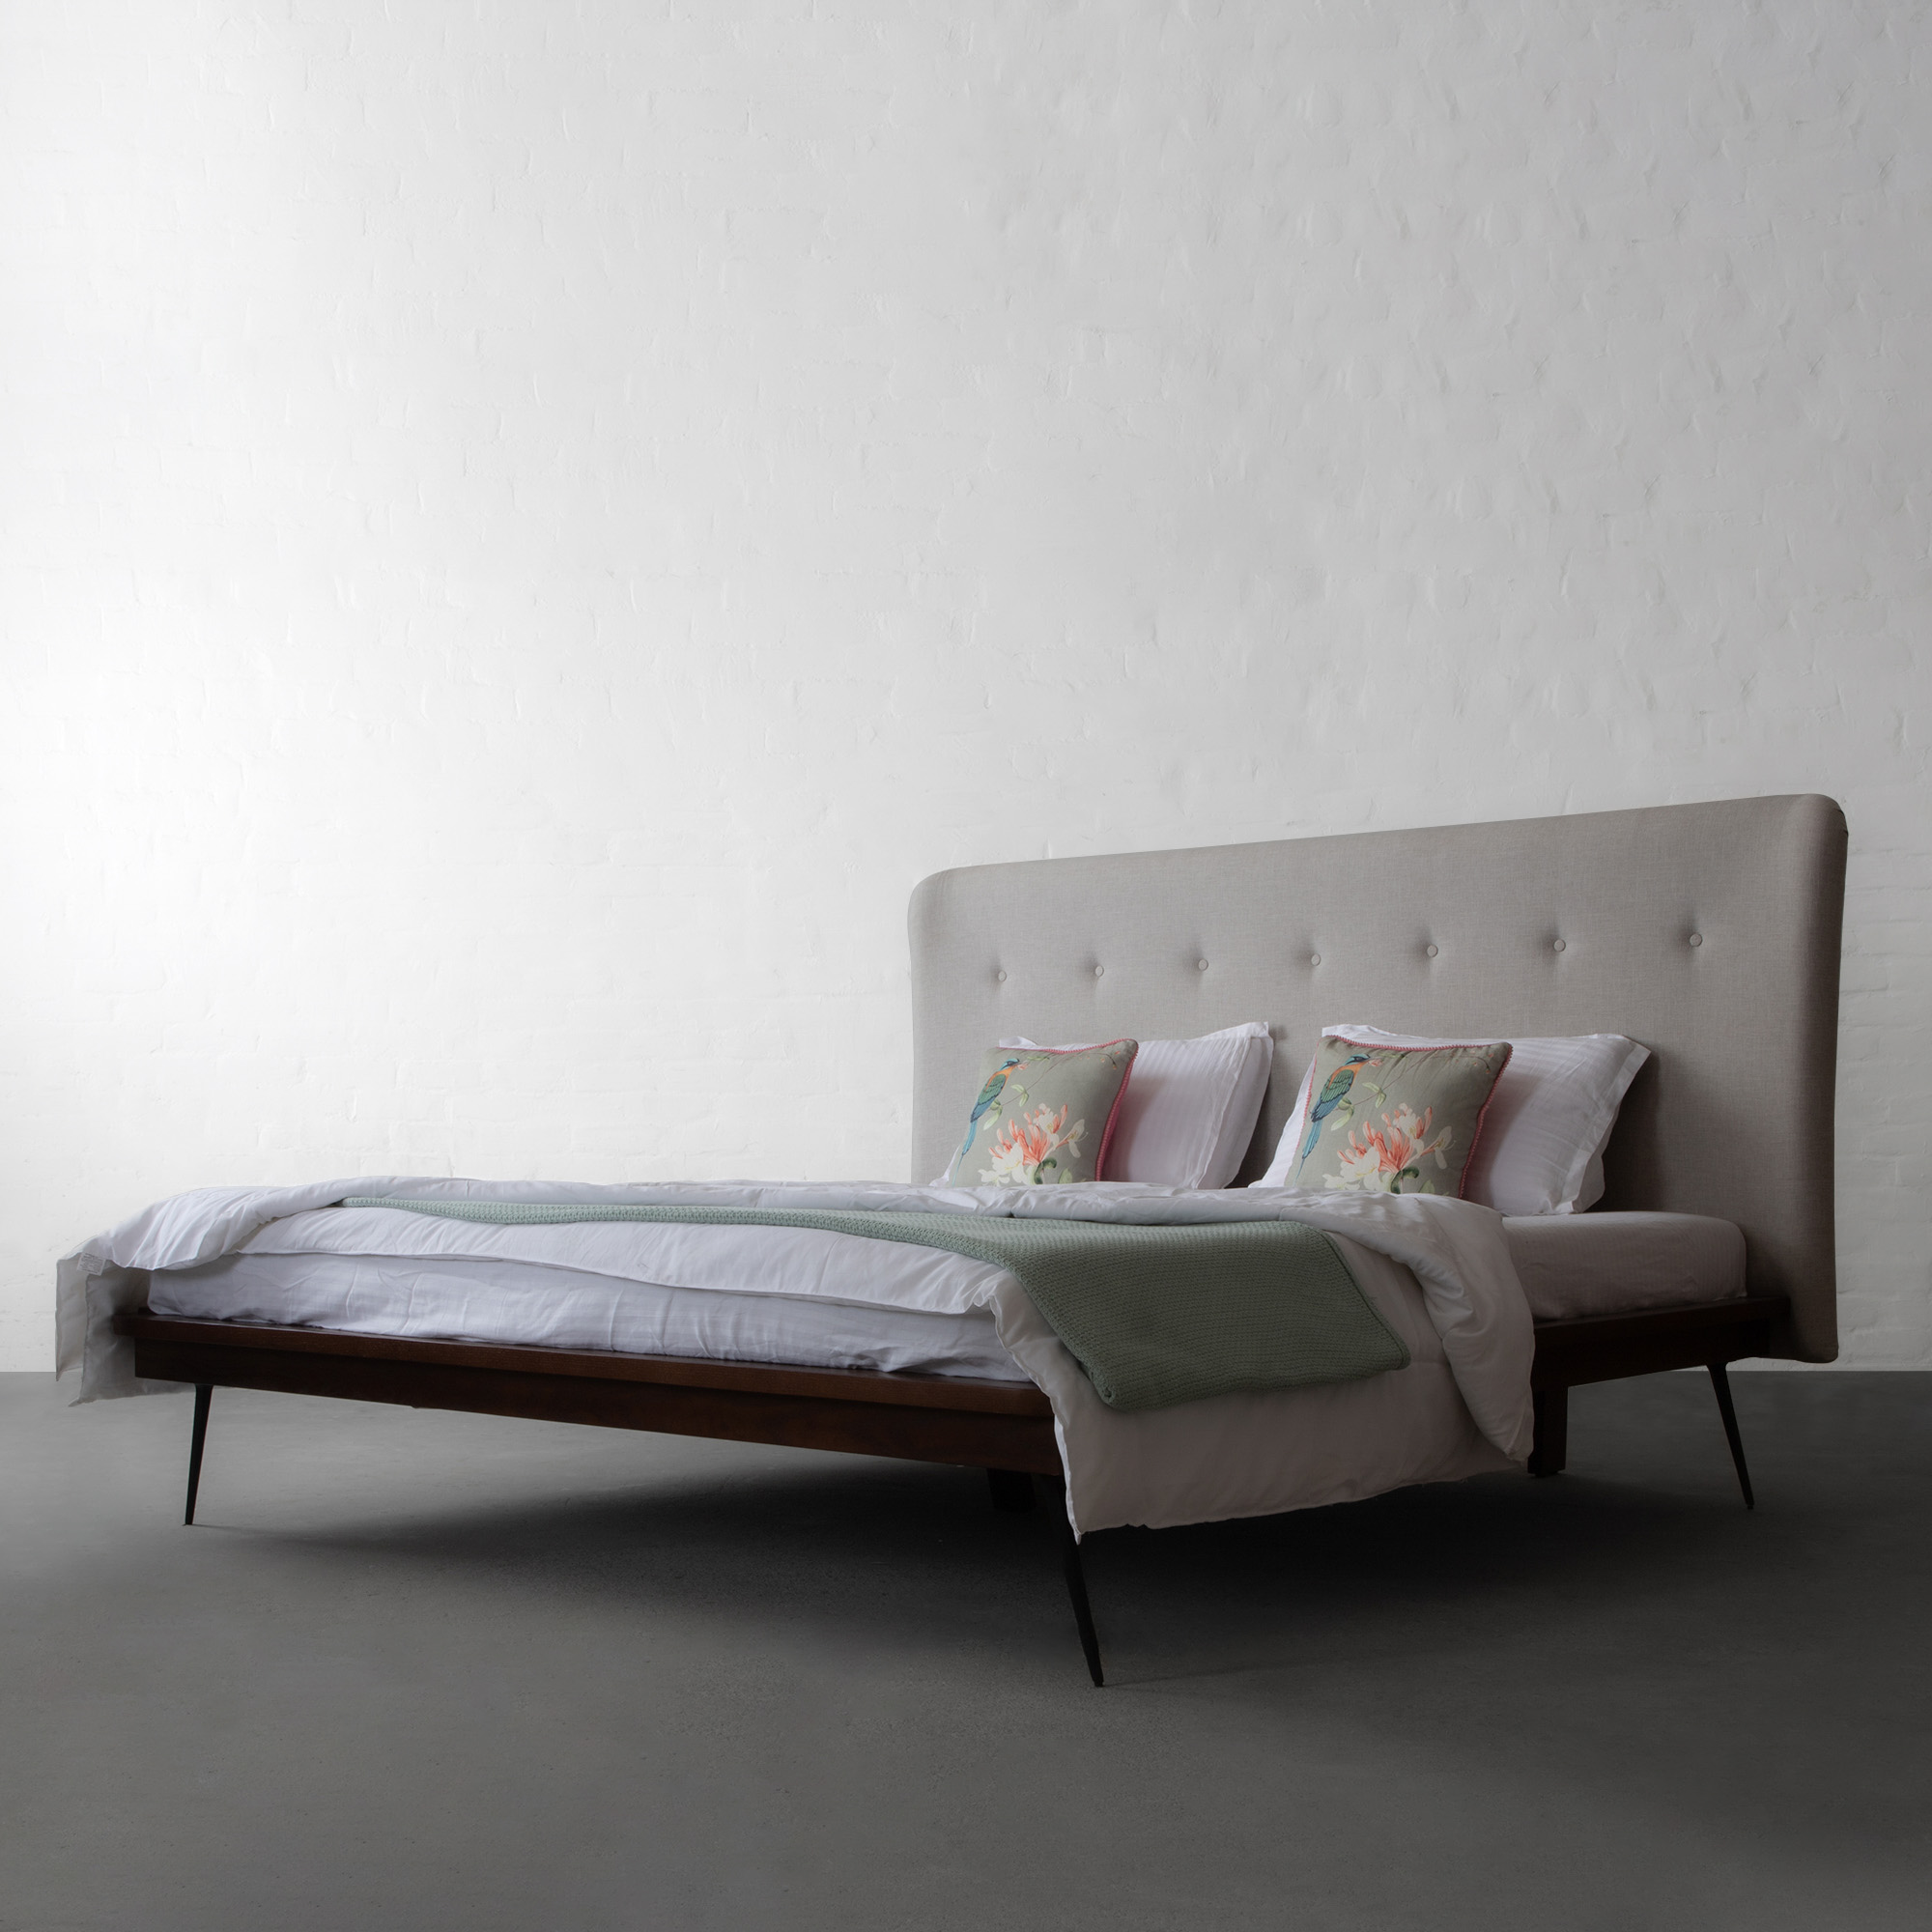 Malabar Hill Upholstered Bed Collection